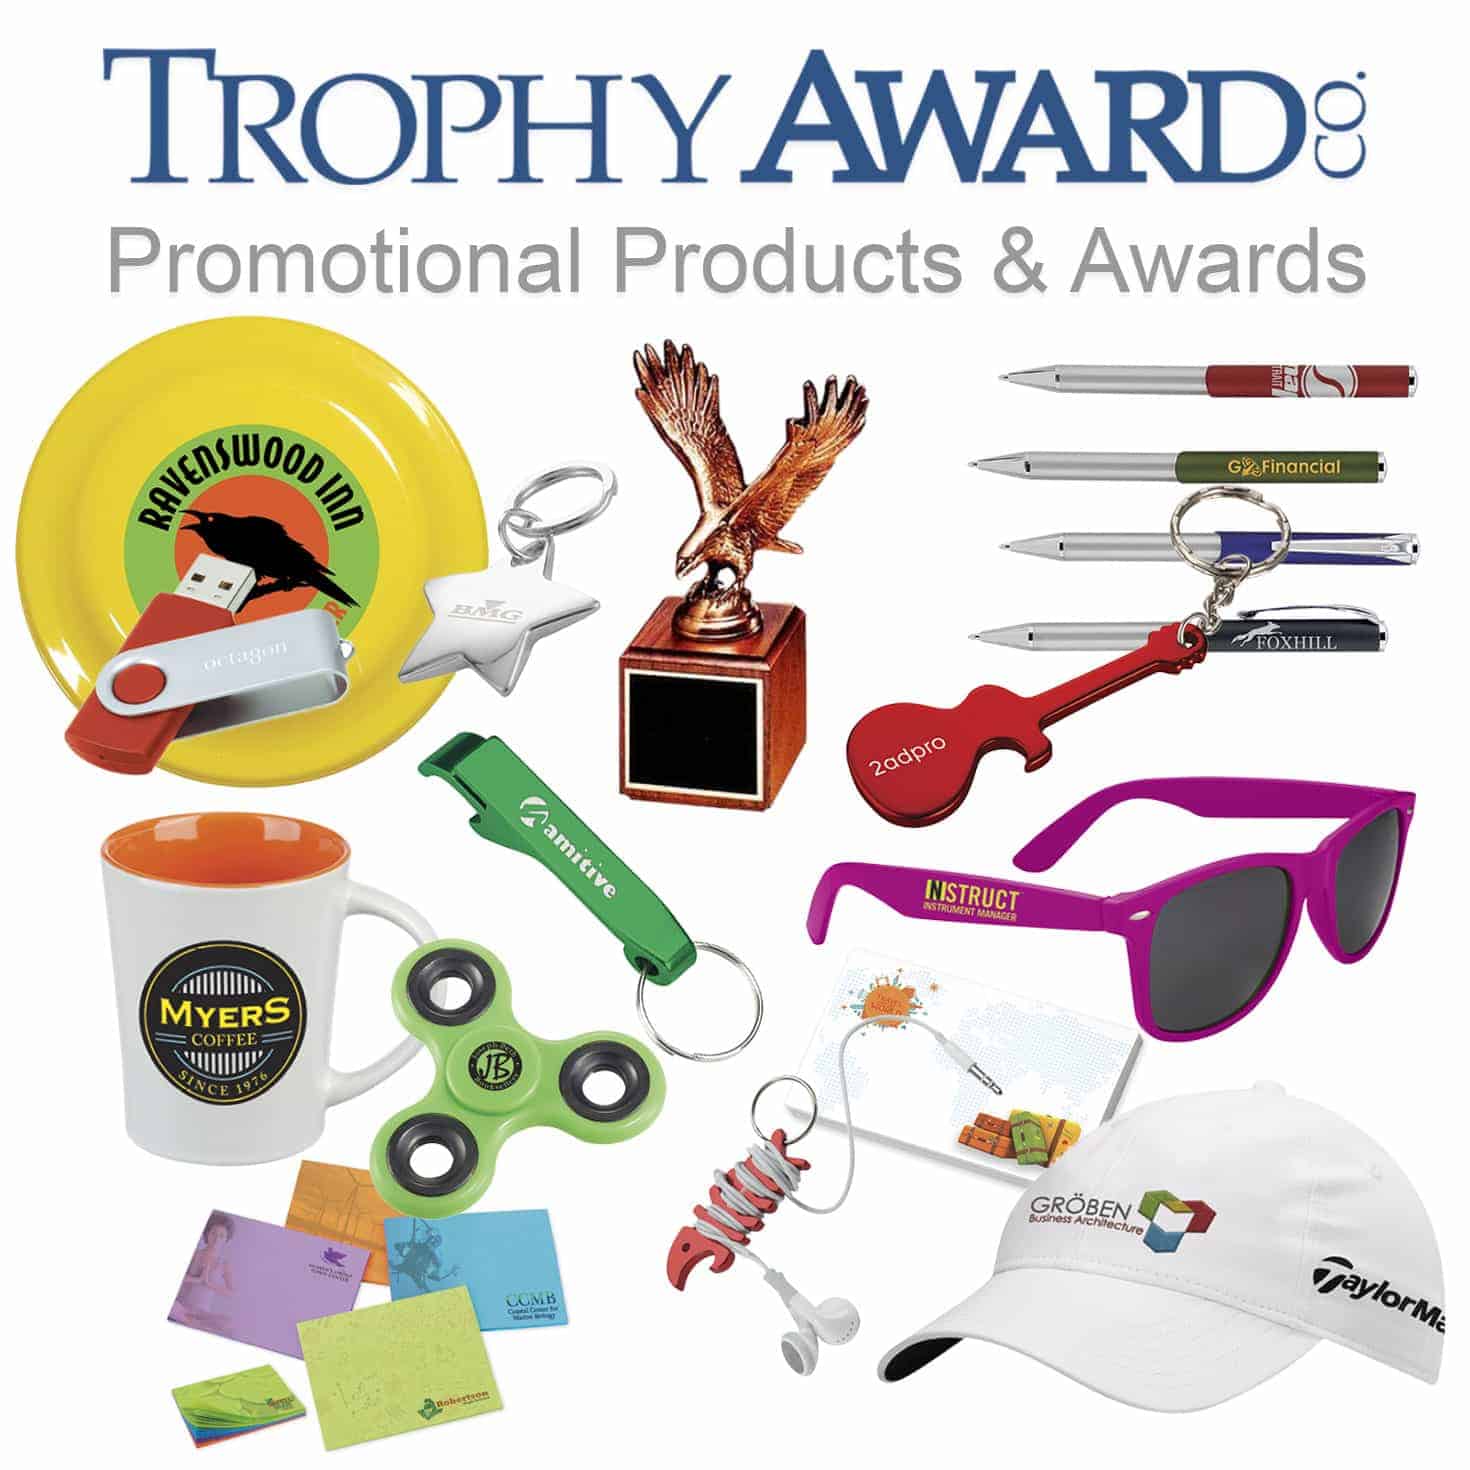 Promotional Product and Awards | Trophy Award Co.